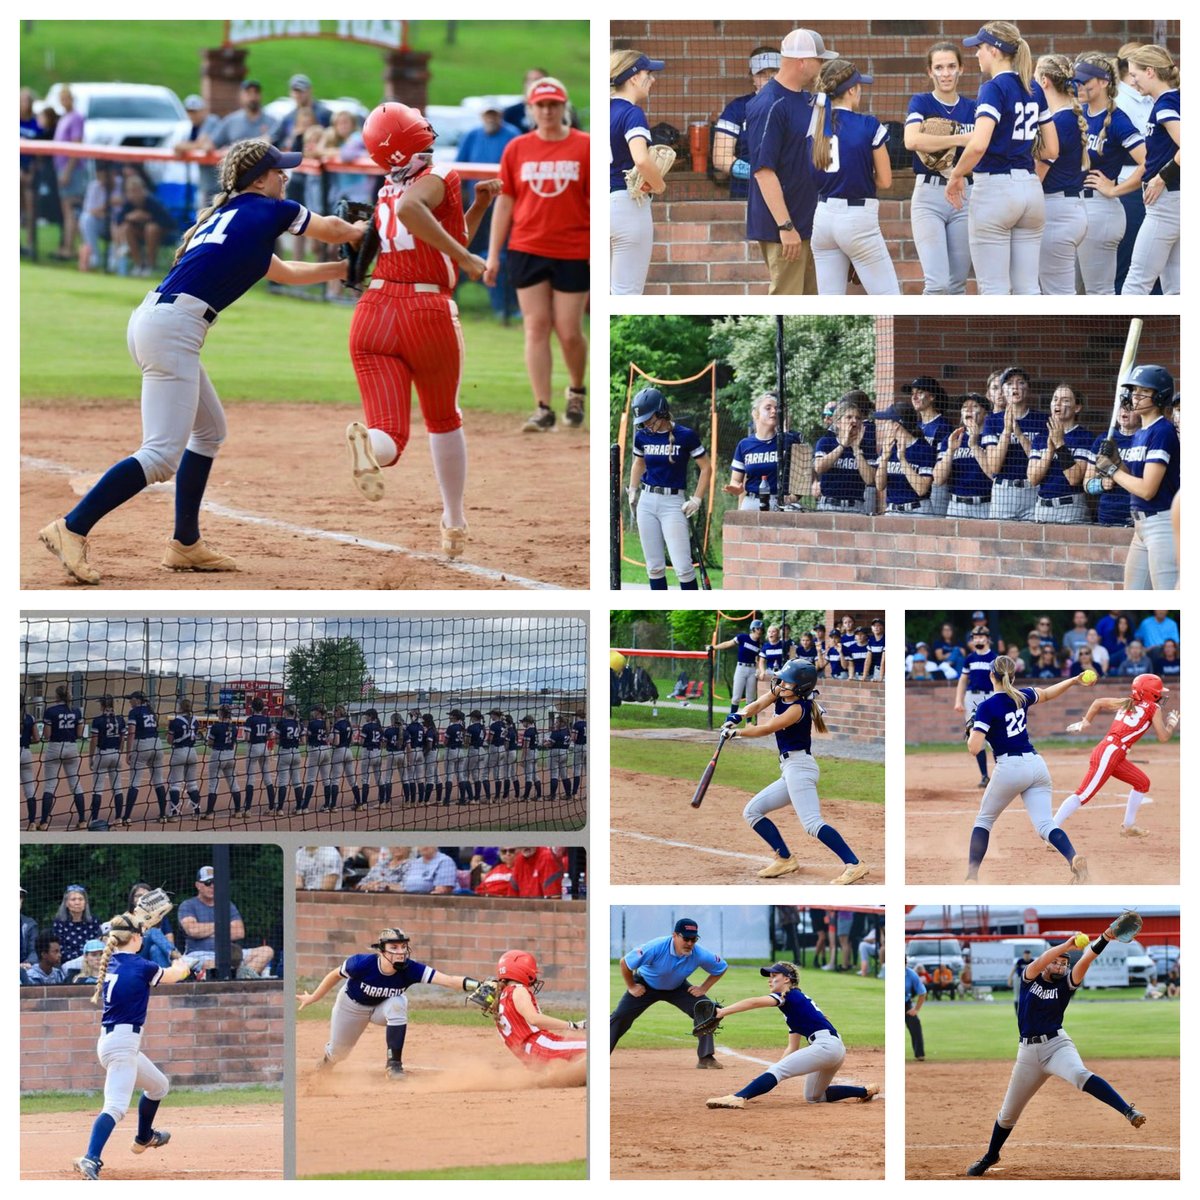 Awesome Photos by Col. Mark Mustard from the Region 2-4A Softball Championship Game on Wednesday Night ⚓️🥎 Final Score: Halls 3 Farragut 0 ___ The Lady Admirals now head to Kingsport on Friday for the Class 4A Sectionals FARRAGUT AT DOBYNS-BENNETT, 5:30 (Friday, May 17) 🥎⚓️